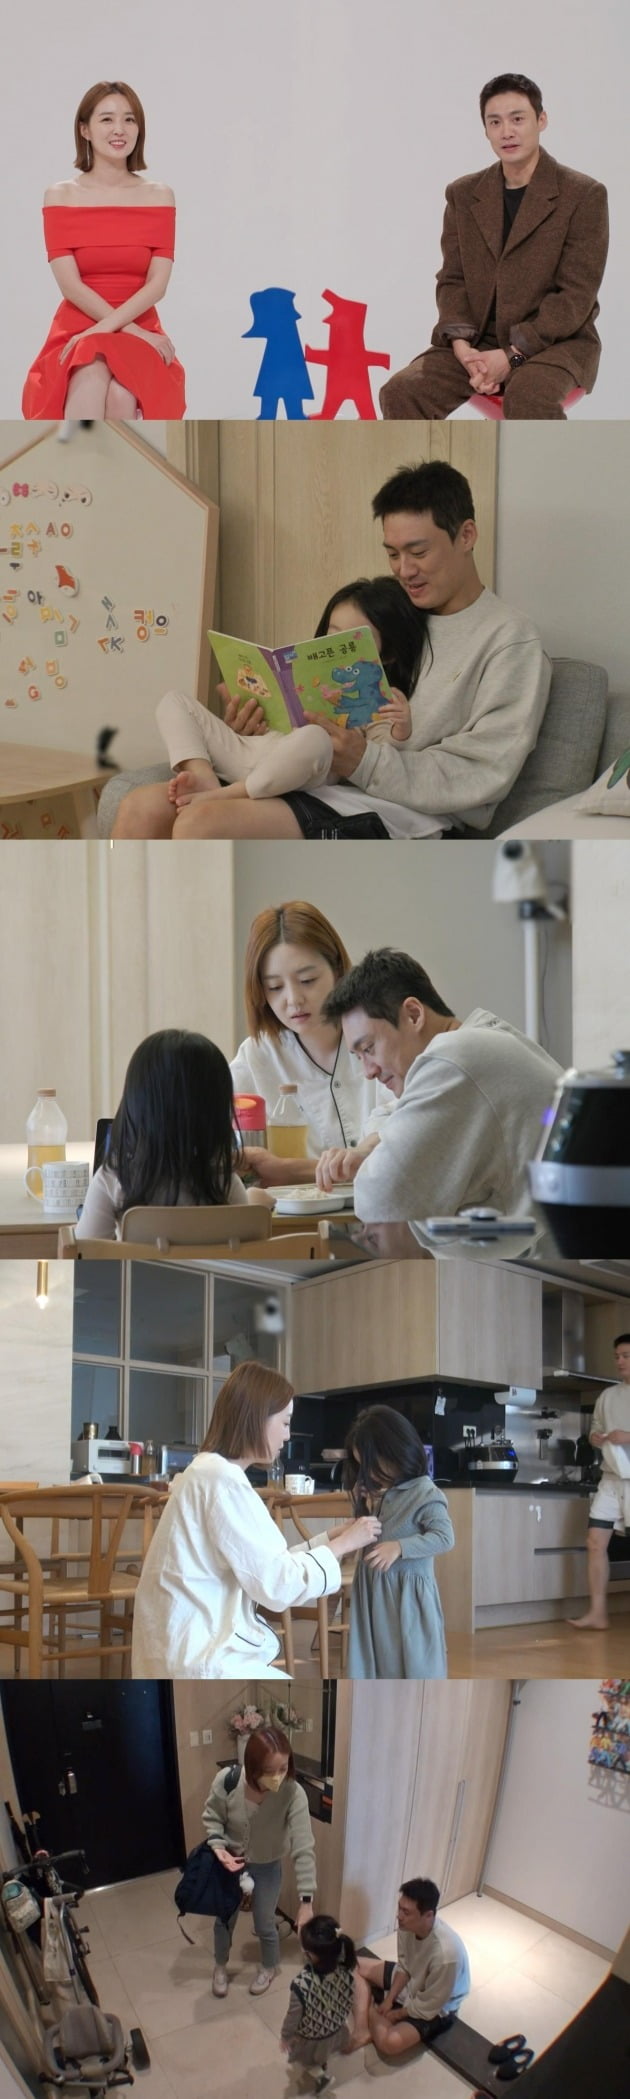 SBS entertainment Same Bed, Different Dreams 22 - You Are My Destiny (hereinafter referred to as Same Bed, Different Dreams 22) will be joined by National Representative Anatenor Couple Oh Sang-jin and Kim So-young.On the 10th, Same Bed, Different Dreams 22, the marriage life of Oh Sang-jin and Kim So-young who joined the new fate couple is revealed.Oh Sang-jin and Kim So-young, who were called marriage encouraging couples, unveiled their newly married life without filtration, and released their daily life, which changed 180 degrees in six years.Oh Sang-jin, who was a love-man husband by publishing a book about honeymoon life with Kim So-young at the time.He is now in the sixth year of marriage, and now he makes the studio feel like a dangerous statement, The book is a black history of my life and There are many changes in my mind when I live.In Oh Sang-jins bomb Confessions, his wife Kim So-young said, I loved me because it was a black history?Oh Sang-jin, who has won the title of Hand of the Great Child with a rumor of professional cooking and living skills, is surprised by the fact that he is the real reason for his wife Kim So-young Won Mi Ha.In an earlier announcement, Kim So-young said, There are many unknown things about the husband of a tough child. He revealed Oh Sang-jins anti-war people and collected a big topic.Oh Sang-jin reveals the real intention of storm Won Mi Ha, who is reborn as CEO, saying, I want to play and I want to live like a middle because my wifes business is good.The reversal routine of Oh Sang-jin, a dreamer of a limited amount, will be released through broadcasting.Oh Sang-jin, Kim So-young couple unveil their two Love House and four-year-old daughter for the first timeEspecially when the questionable objects that have not been seen in Same Bed, Different Dreams 22 have been found throughout the couples house, MCs have been unable to hide their absurdity, saying that they are homeless schoolboy style.The daughter of the couple, who secretly kept her face as well as her name, will be released for the first time.The daughter of the two is like the brain and appearance of the elite announcer parents from prestigious universities, and she was the master of Hangul at 36 months old.IQ 148 Dad Oh Sang-jins secret to what is the secret of attention is attracting attention.Oh Sang-jin, Kim So-youngs real reality marriage life can be found at Same Bed, Different Dreams 22 broadcasted at 11:10 pm on the 10th.